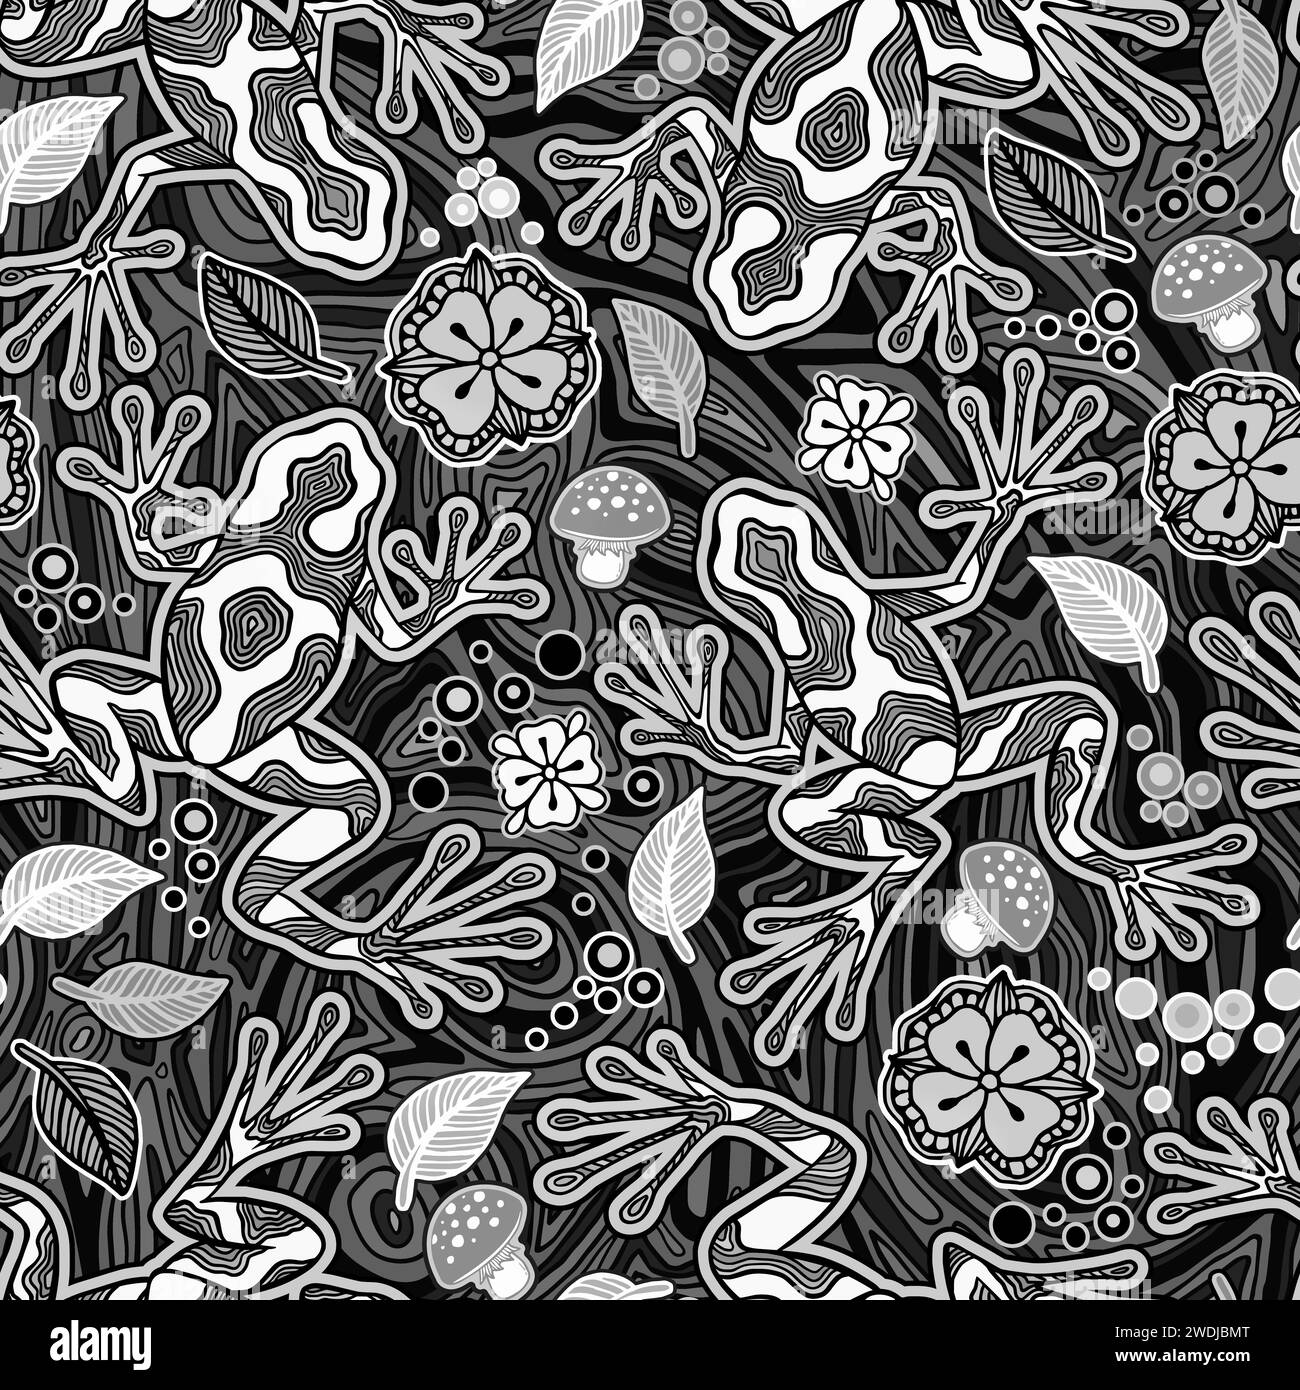 Hawaiian Black and White Poison Dart Frog Psychedelic Seamless Pattern, Trippy Art Fantasy Mushrooms and Reptilian Stock Photo